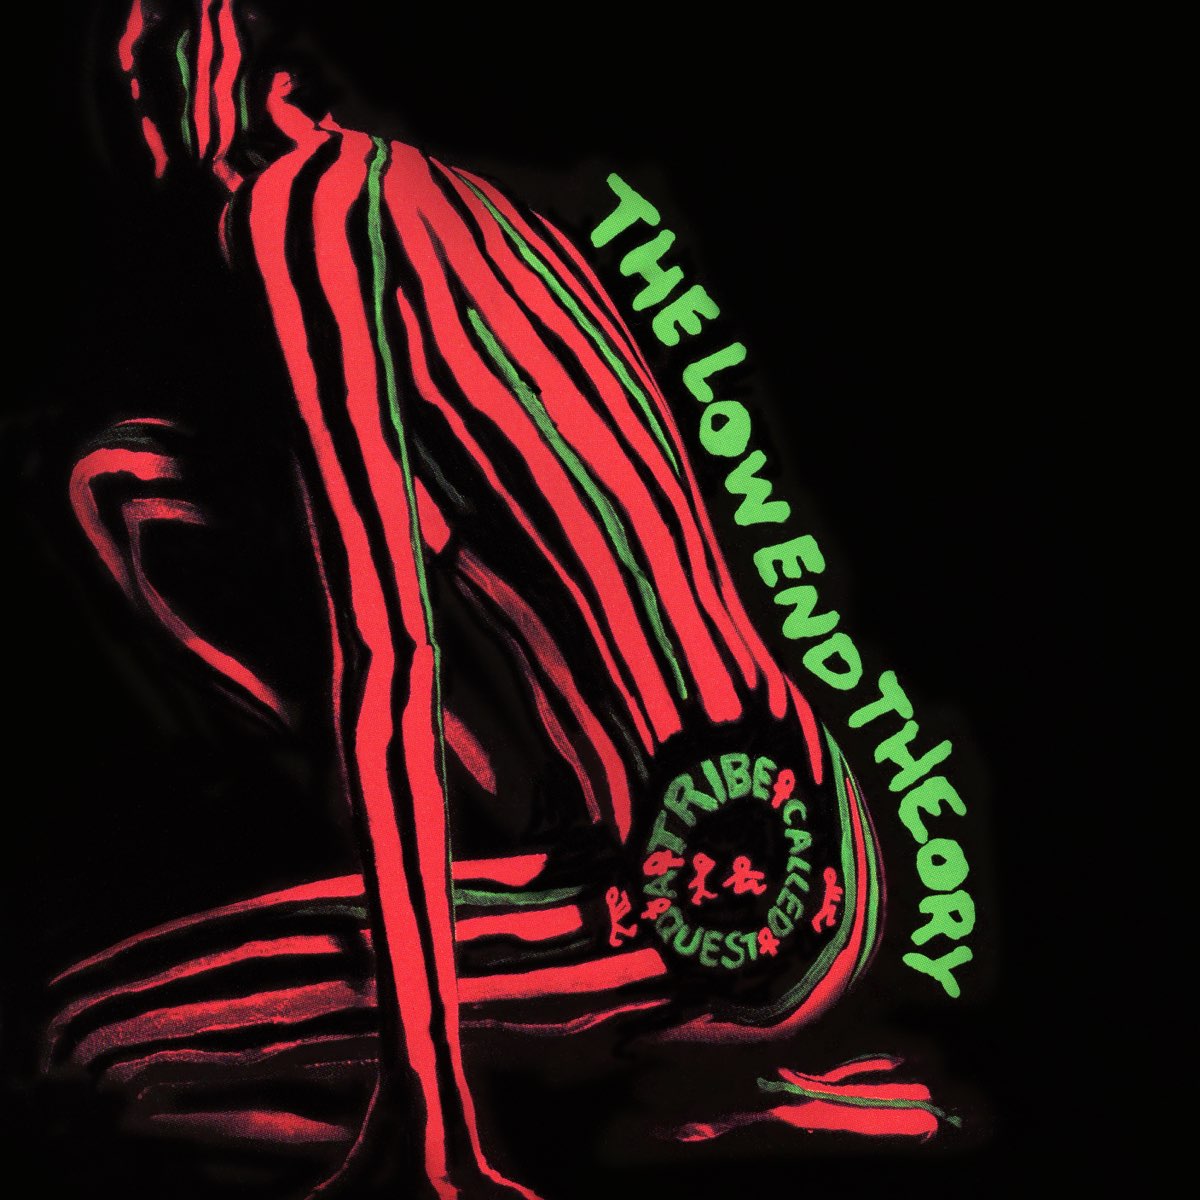 "The Low End Theory" by A Tribe Called Quest